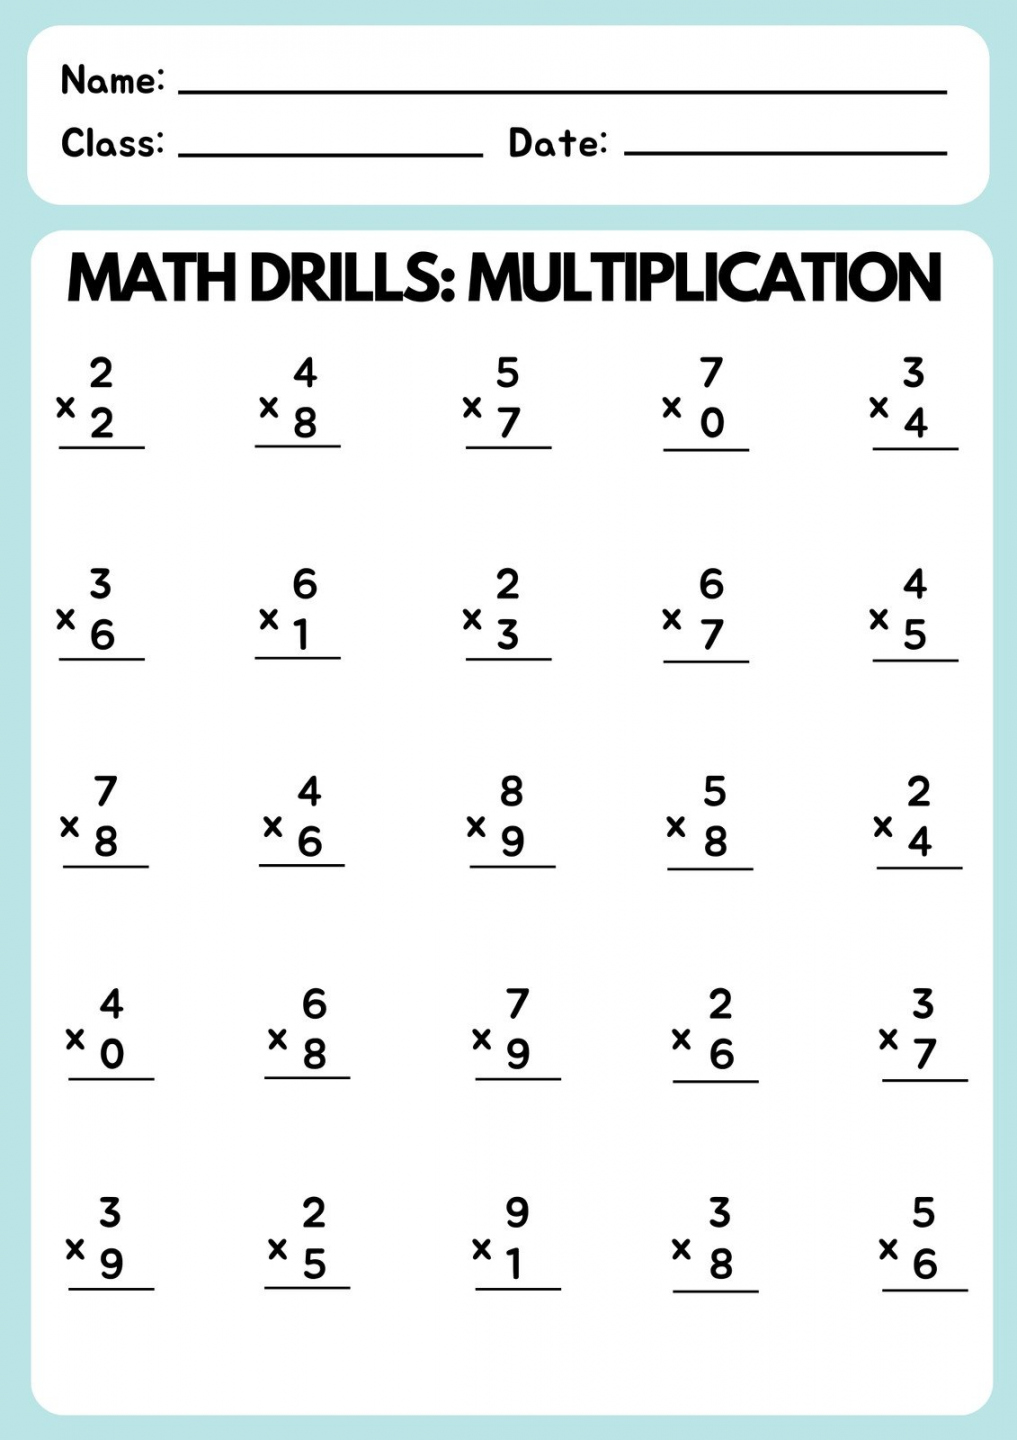 Free Printable Multiplication Worksheets - Printable - Free multiplication worksheet templates to use and print  Canva